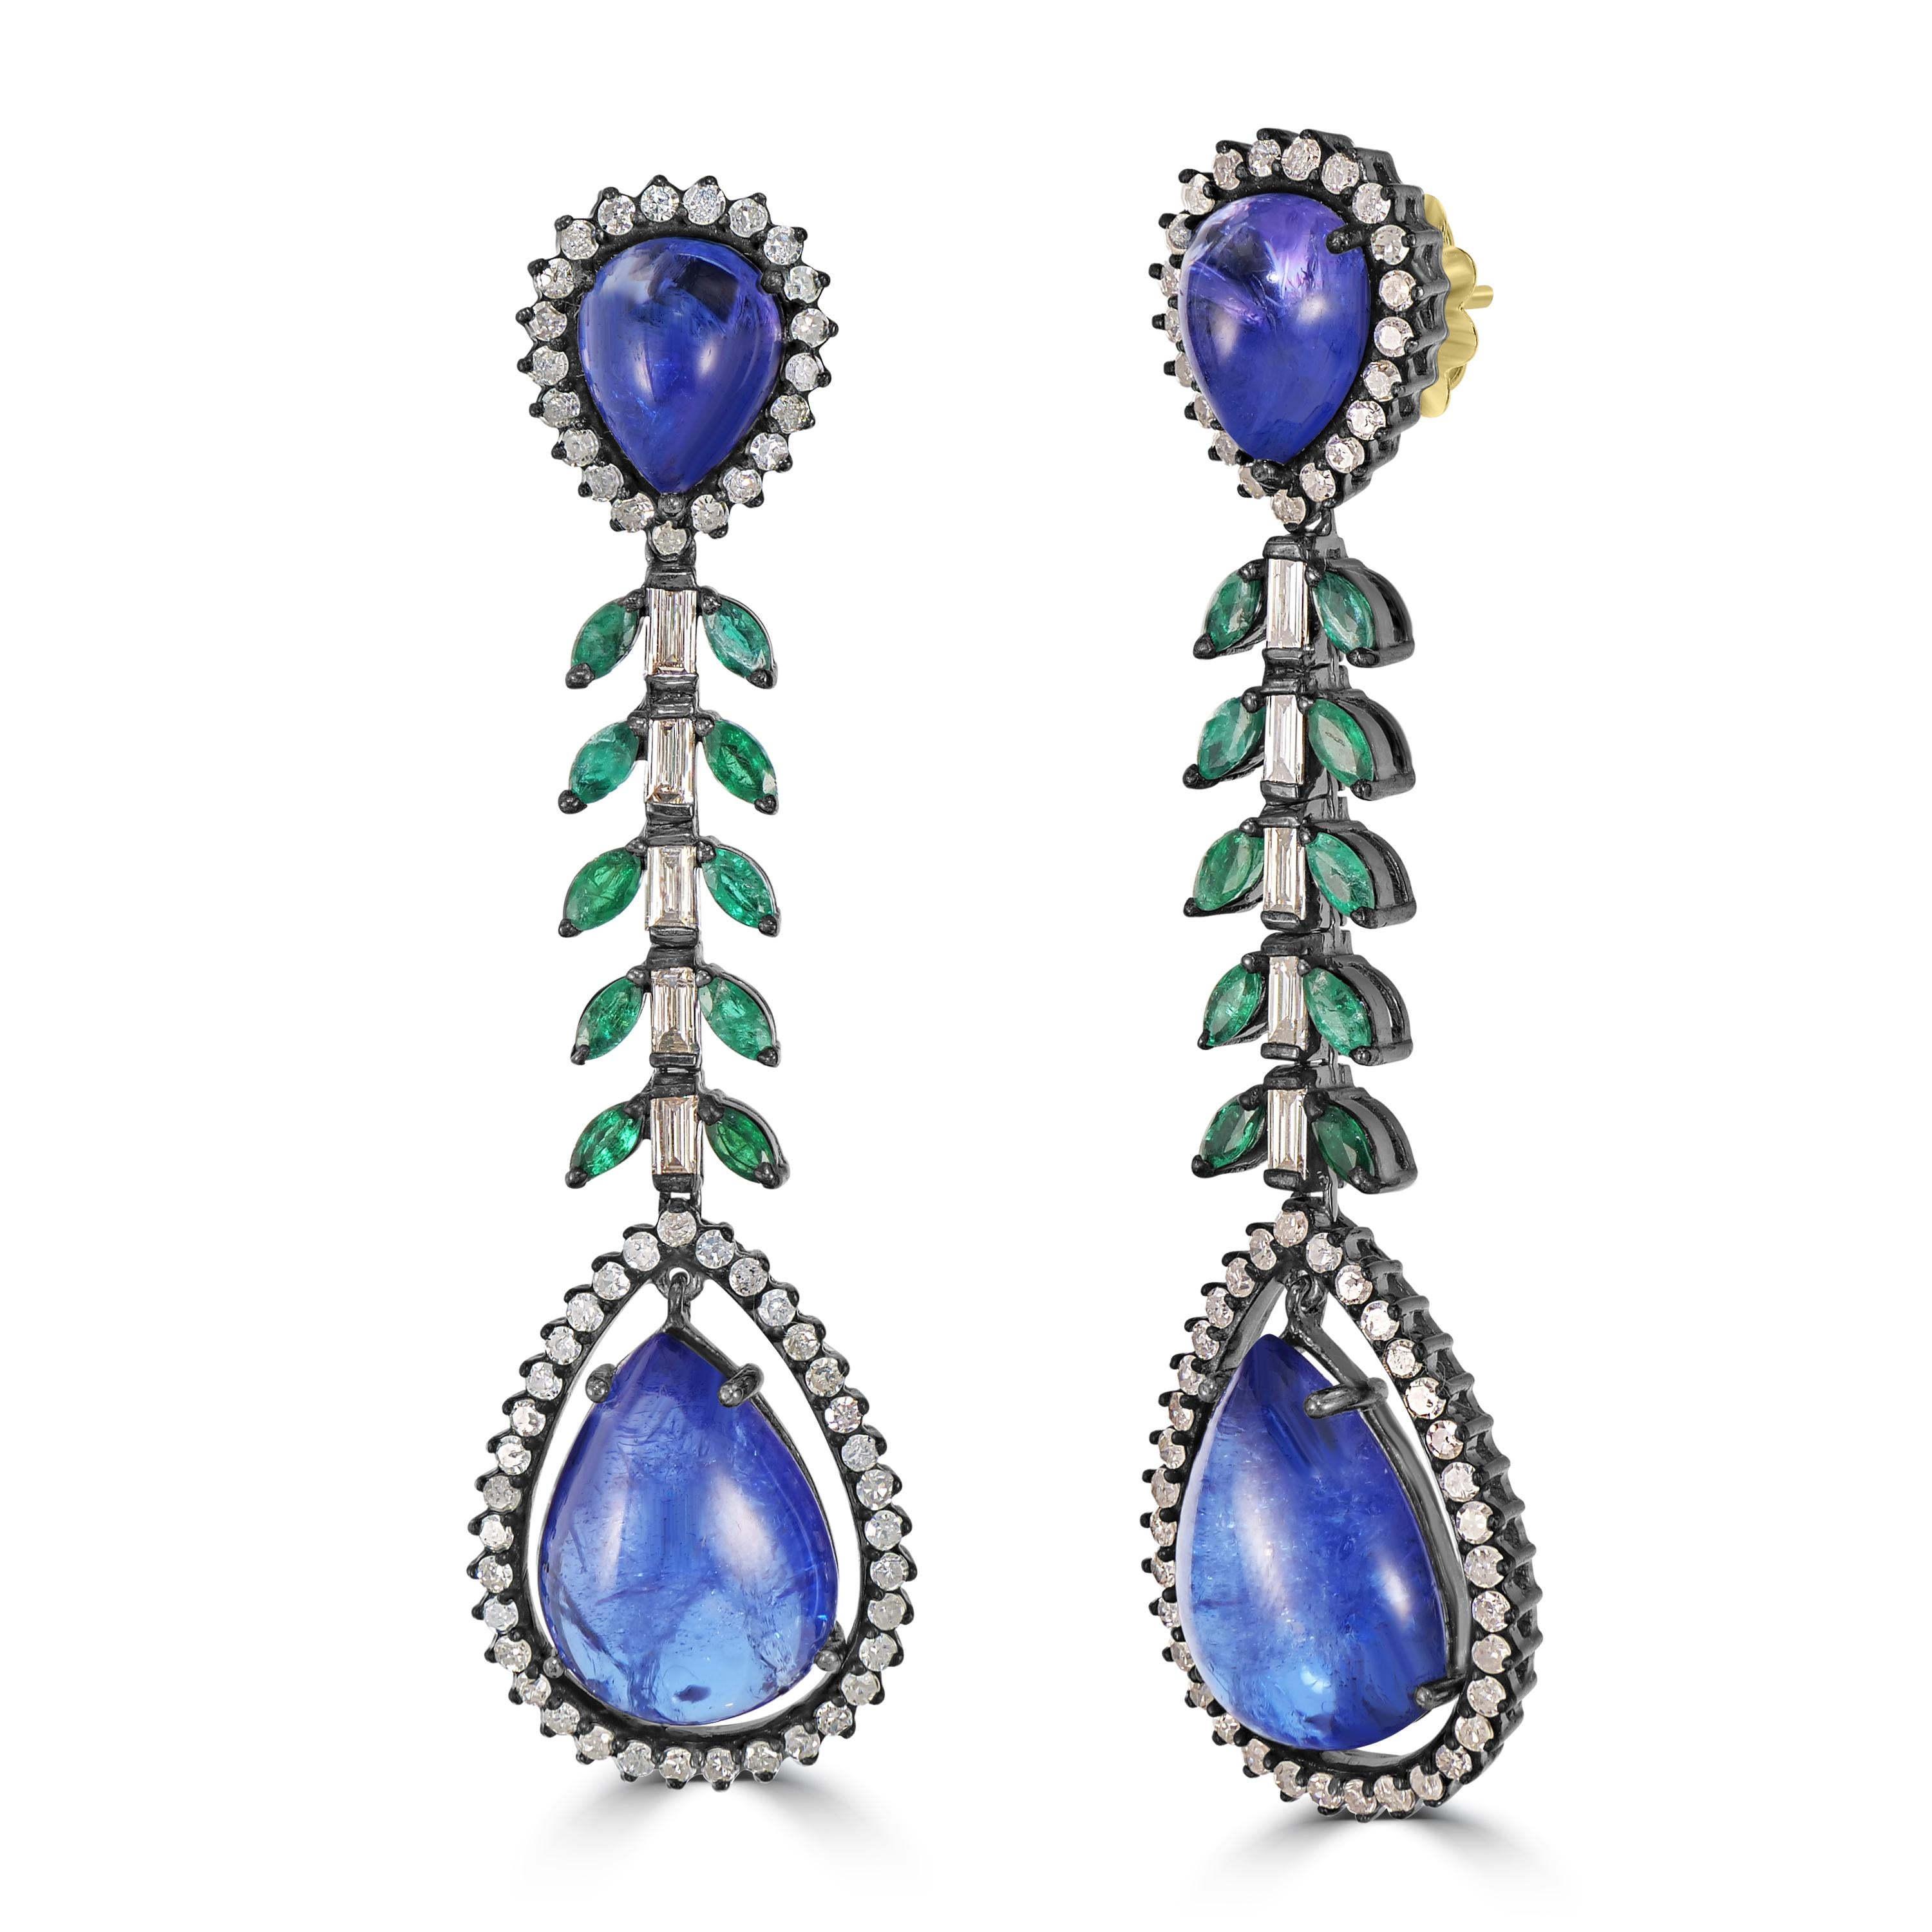 Introducing our Victorian 33.22 Cttw. Tanzanite, Diamond, and Emerald Dangle Earrings—an exquisite manifestation of timeless beauty and natural grace.

At the heart of these earrings are the pear-shaped tanzanites, delicately positioned at both the